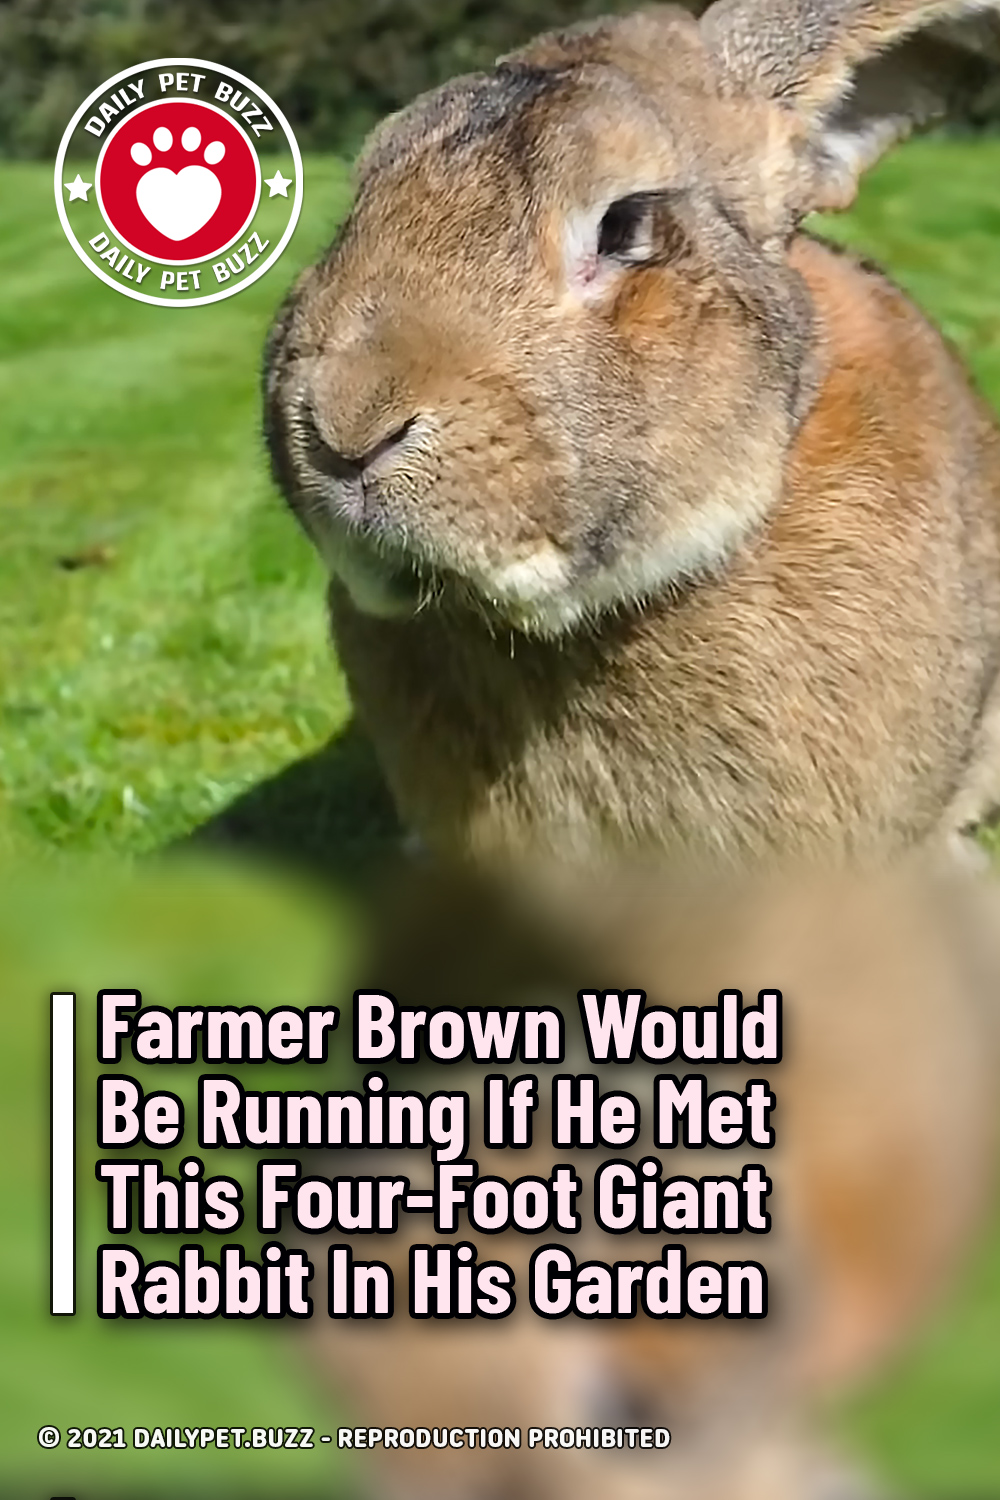 Farmer Brown Would Be Running If He Met This Four-Foot Giant Rabbit In His Garden